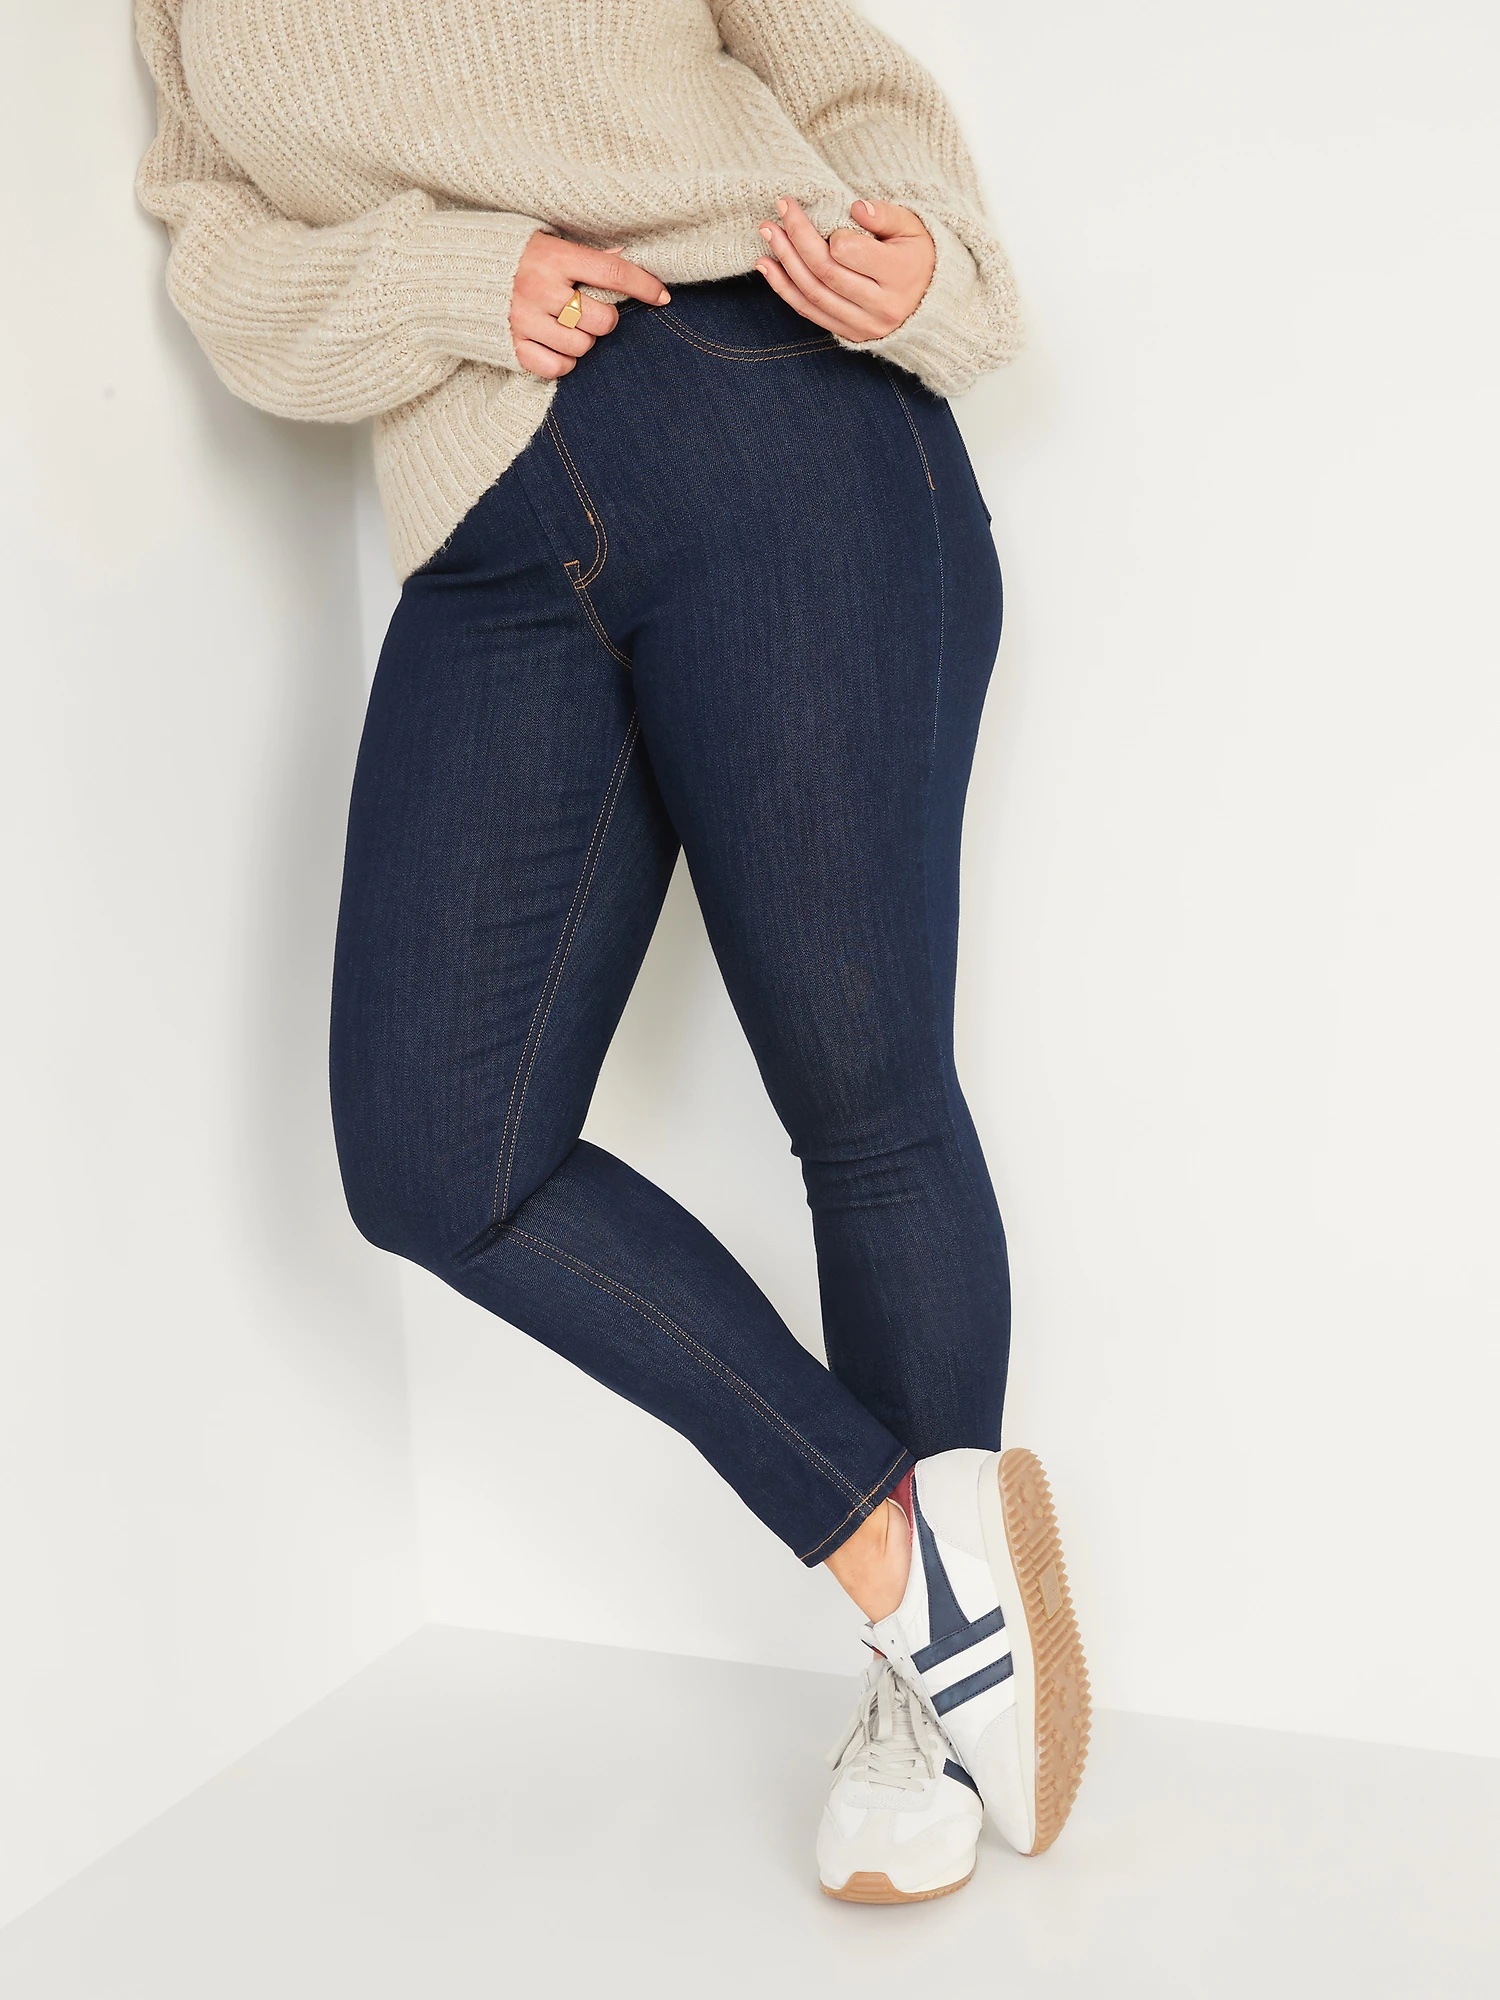 Best Jeans for women to hide belly fat  Distressed Jeans, High Waisted  Jeans, Jeggings etc. 